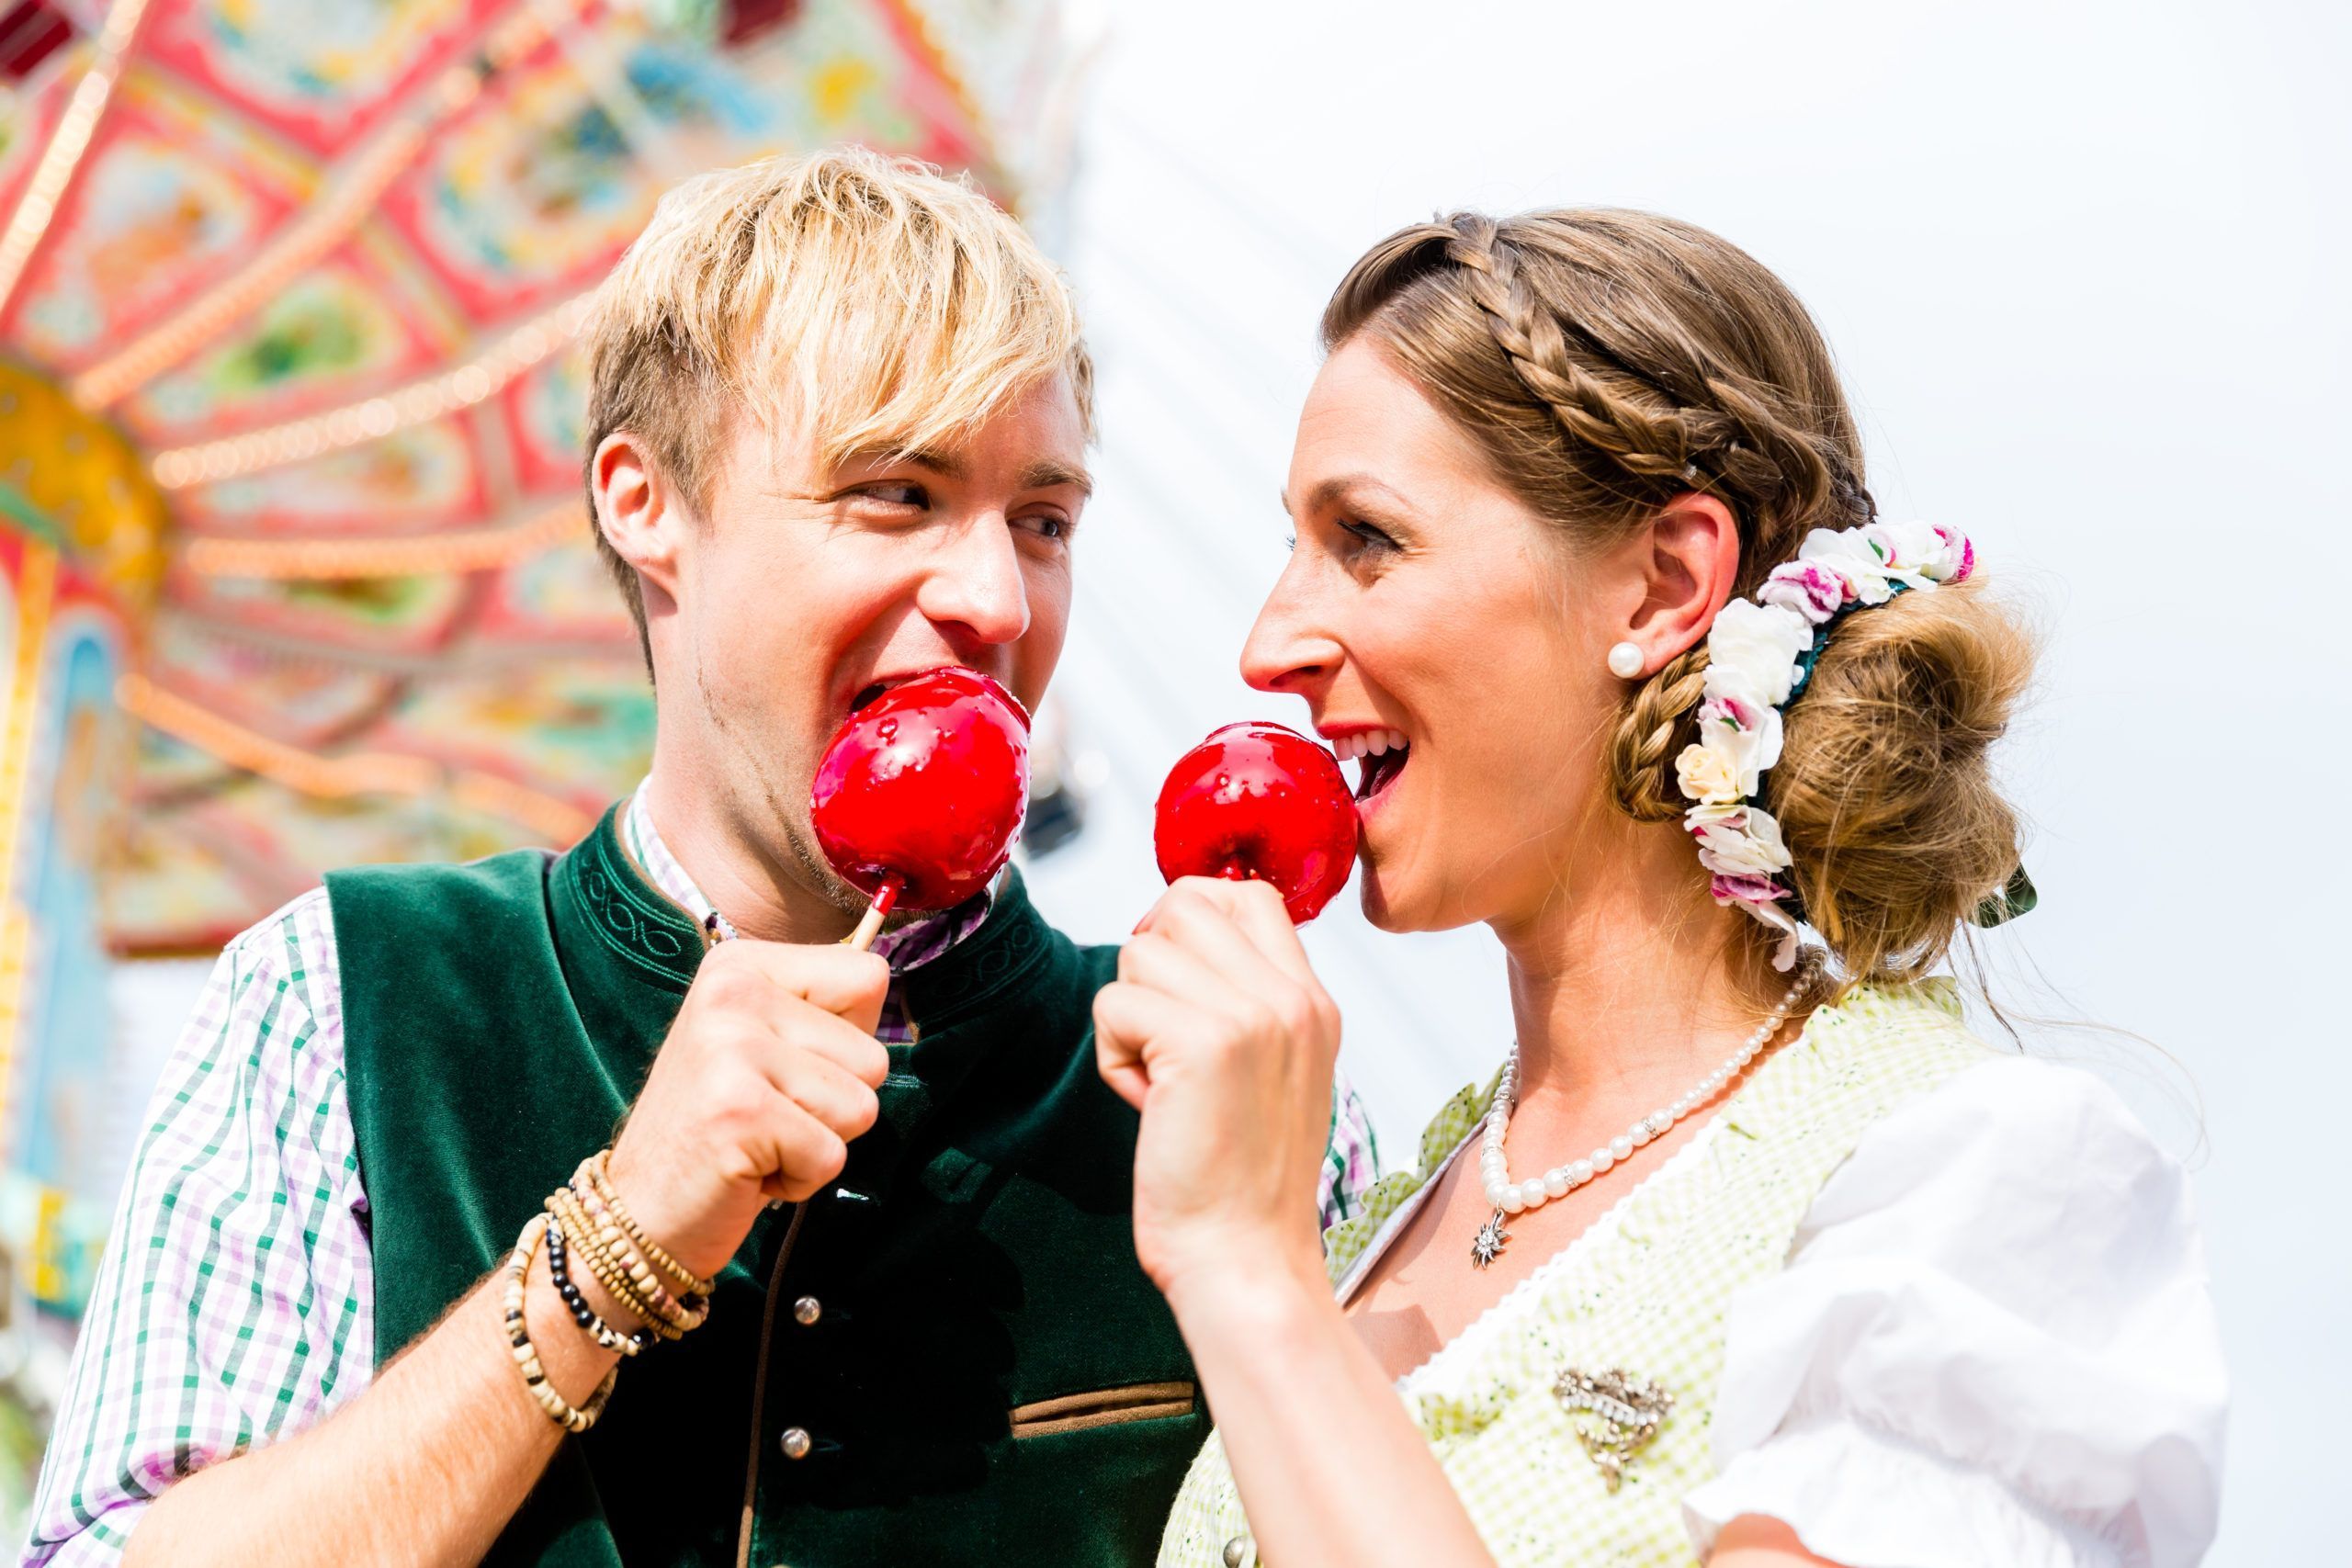 Woman and man biting red candy apples wearing Bavarian traditional clothes in front of carousel